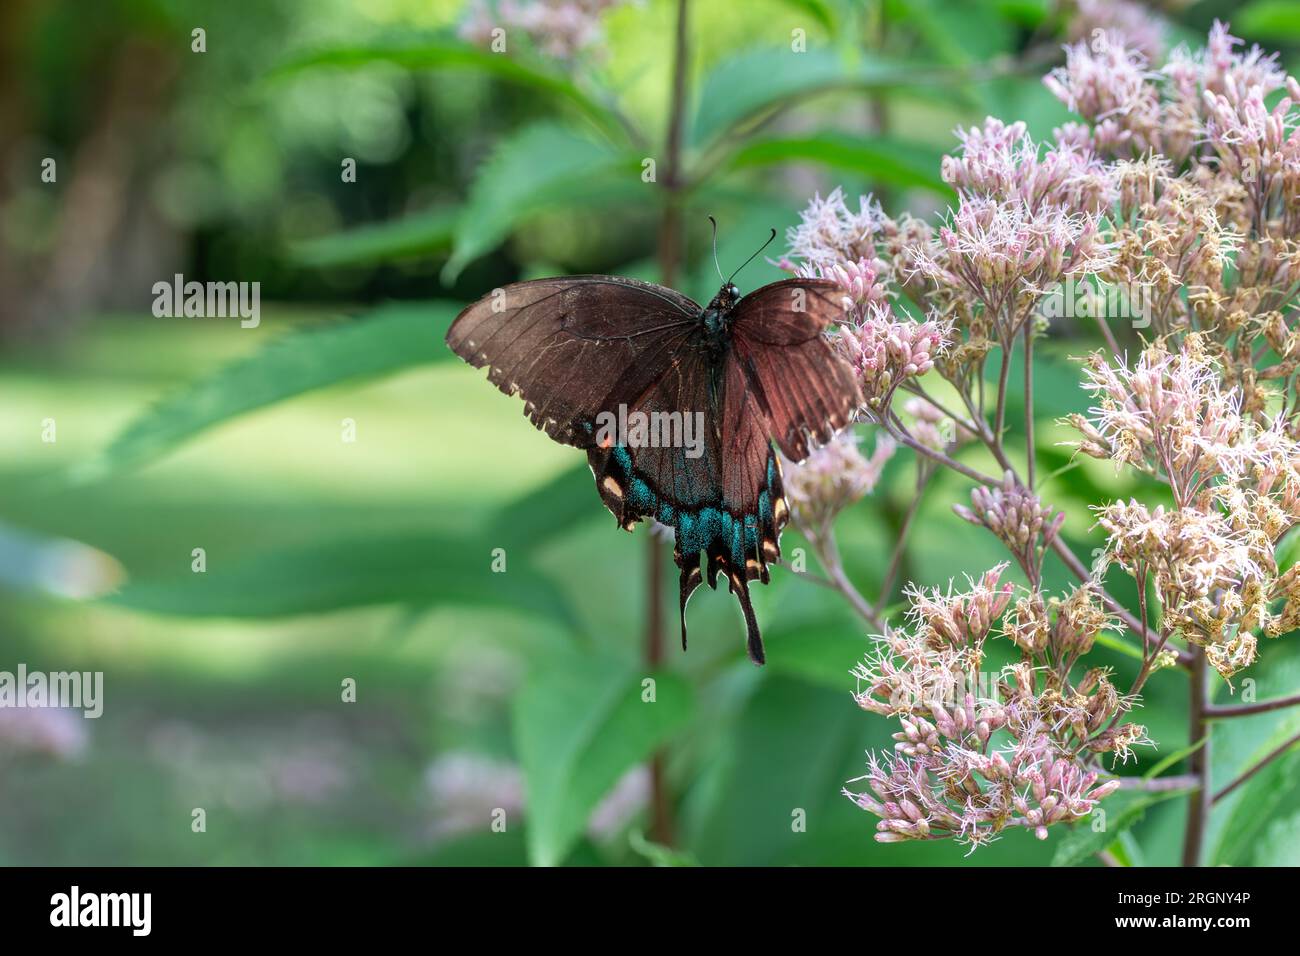 Macro view of a brown and blue swallowtail butterfly (papilionidae) with an injured wing, feeding on a pink Joe-Pye weed in dappled sunlight. Stock Photo